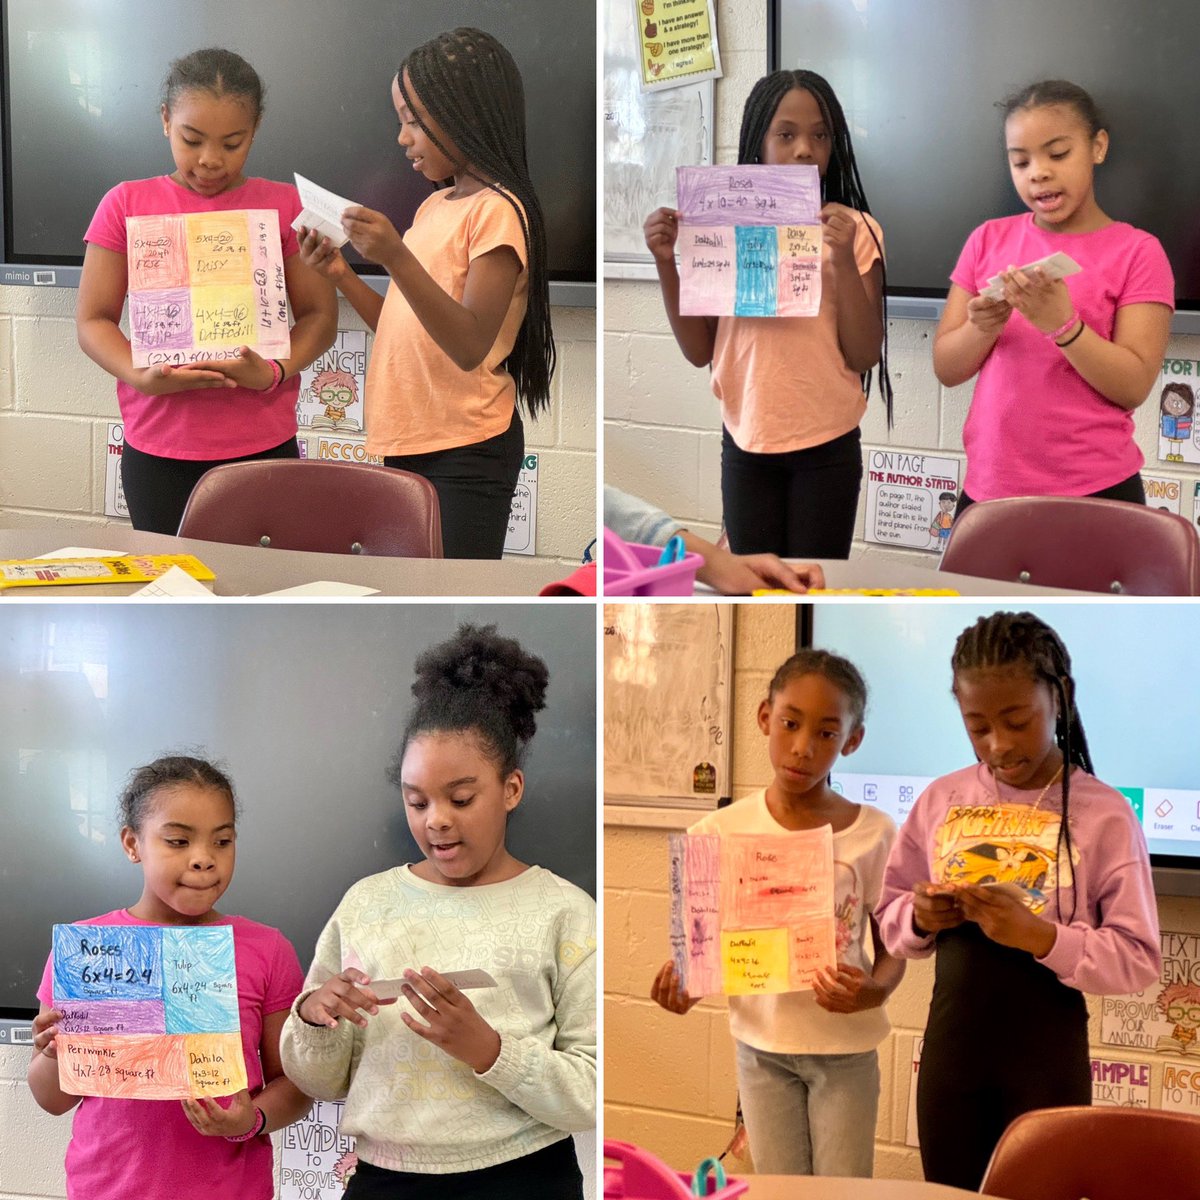 These 3rd graders took action by using math to present a persuasive essay to tale action for our school by creating a GHES beautification plan. Thanks for making a plan to take action and letting us hear your voice! @IBinAPS @APSGardenHills